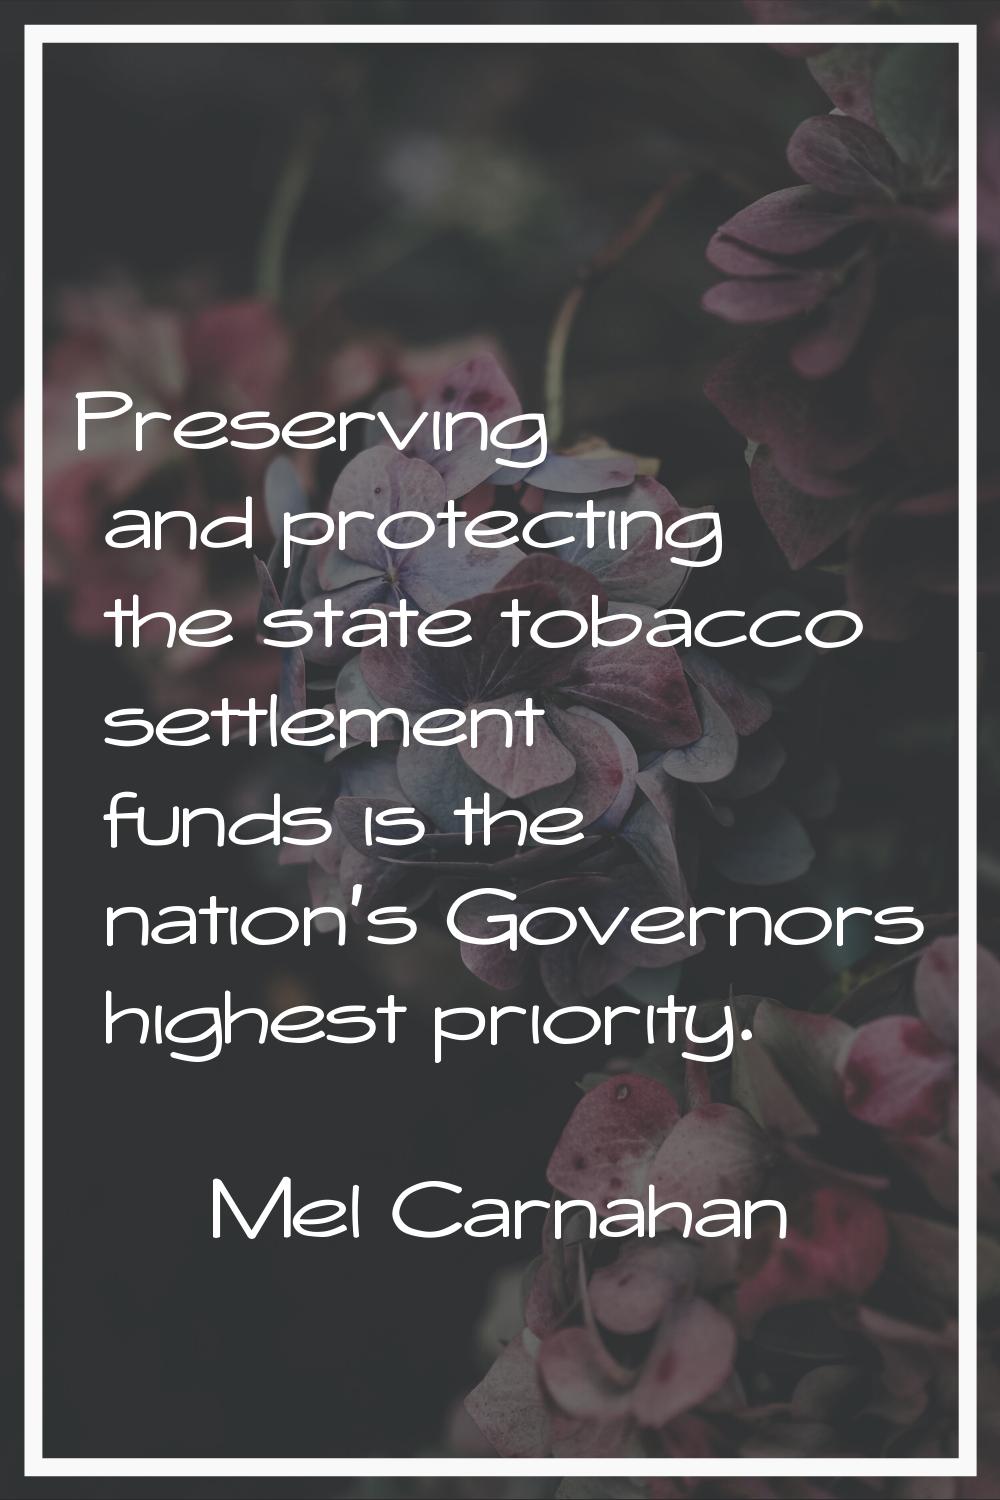 Preserving and protecting the state tobacco settlement funds is the nation's Governors highest prio